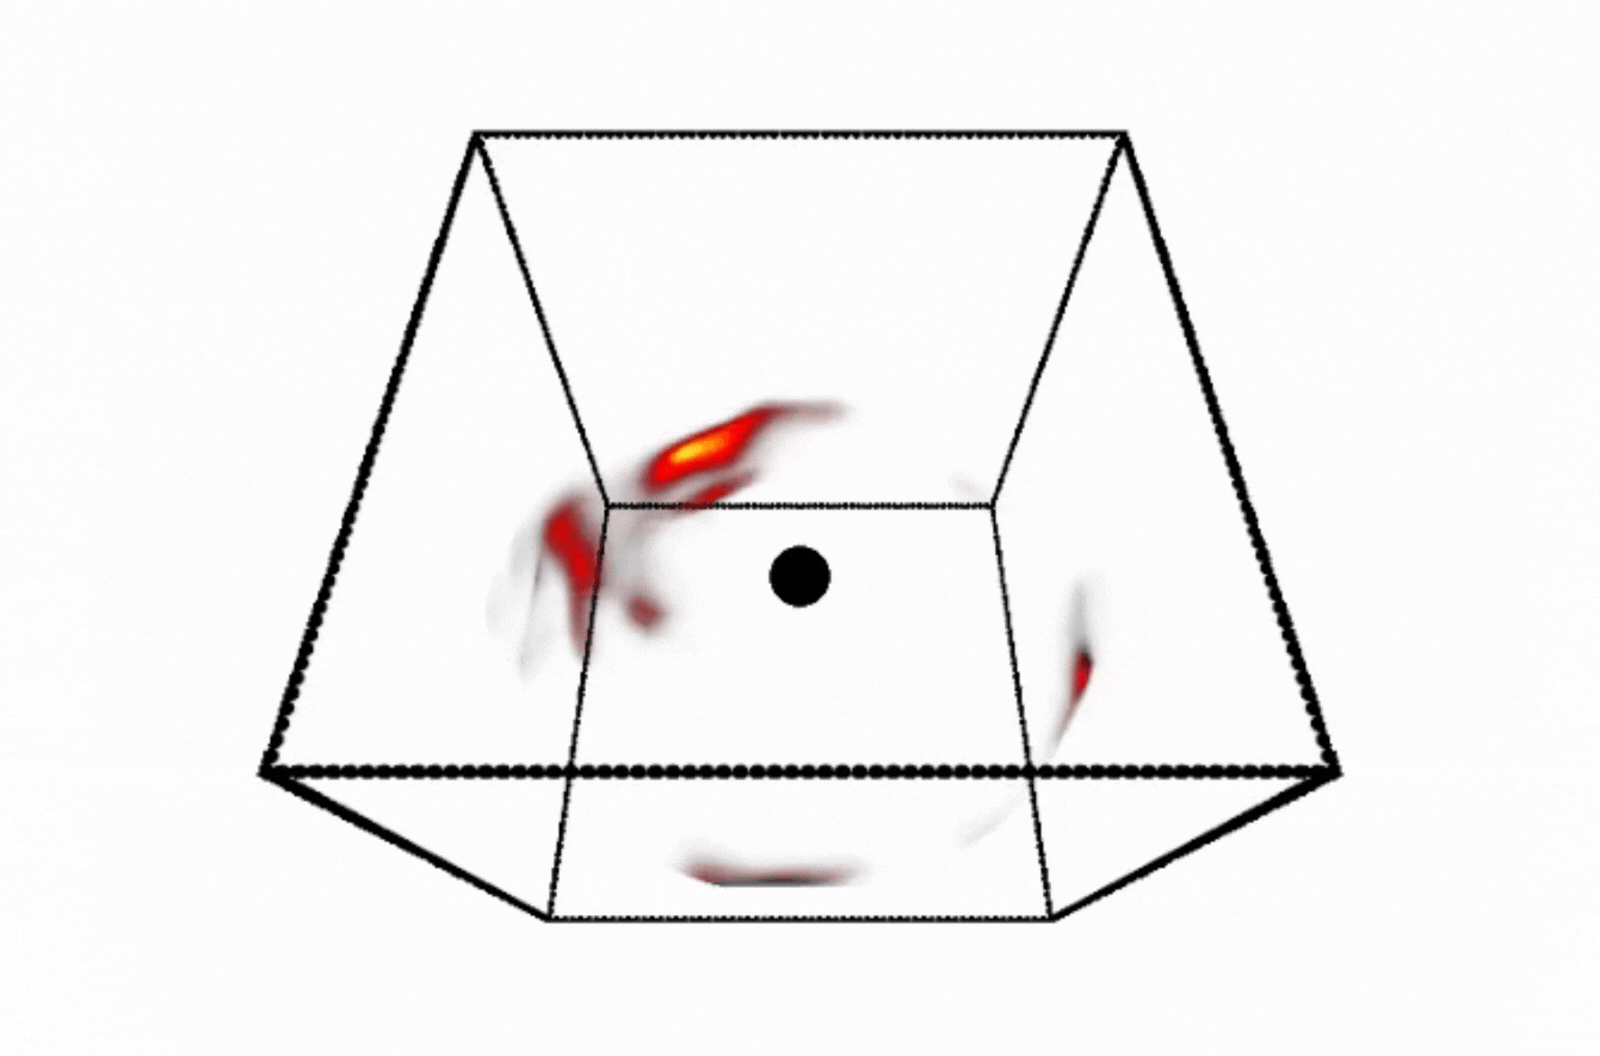 A 3D model of a swirling, red gassy substance moving around a black circle inside a transparent cube.